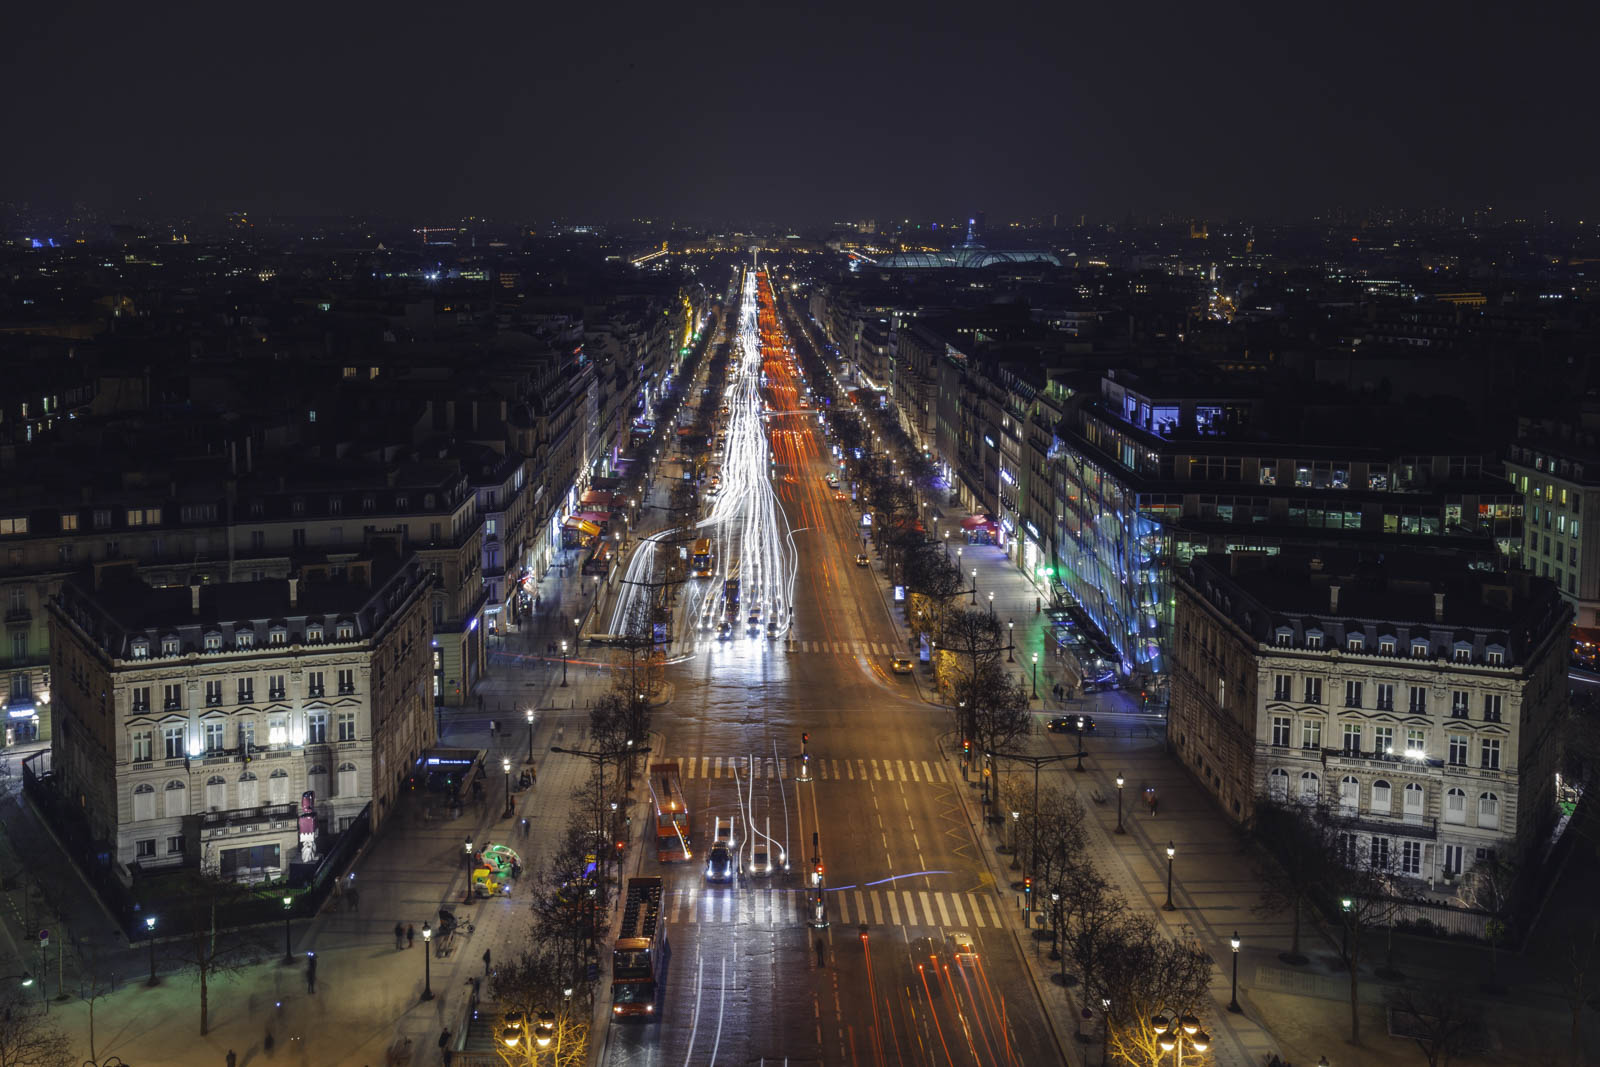 The Champs Elysees at night